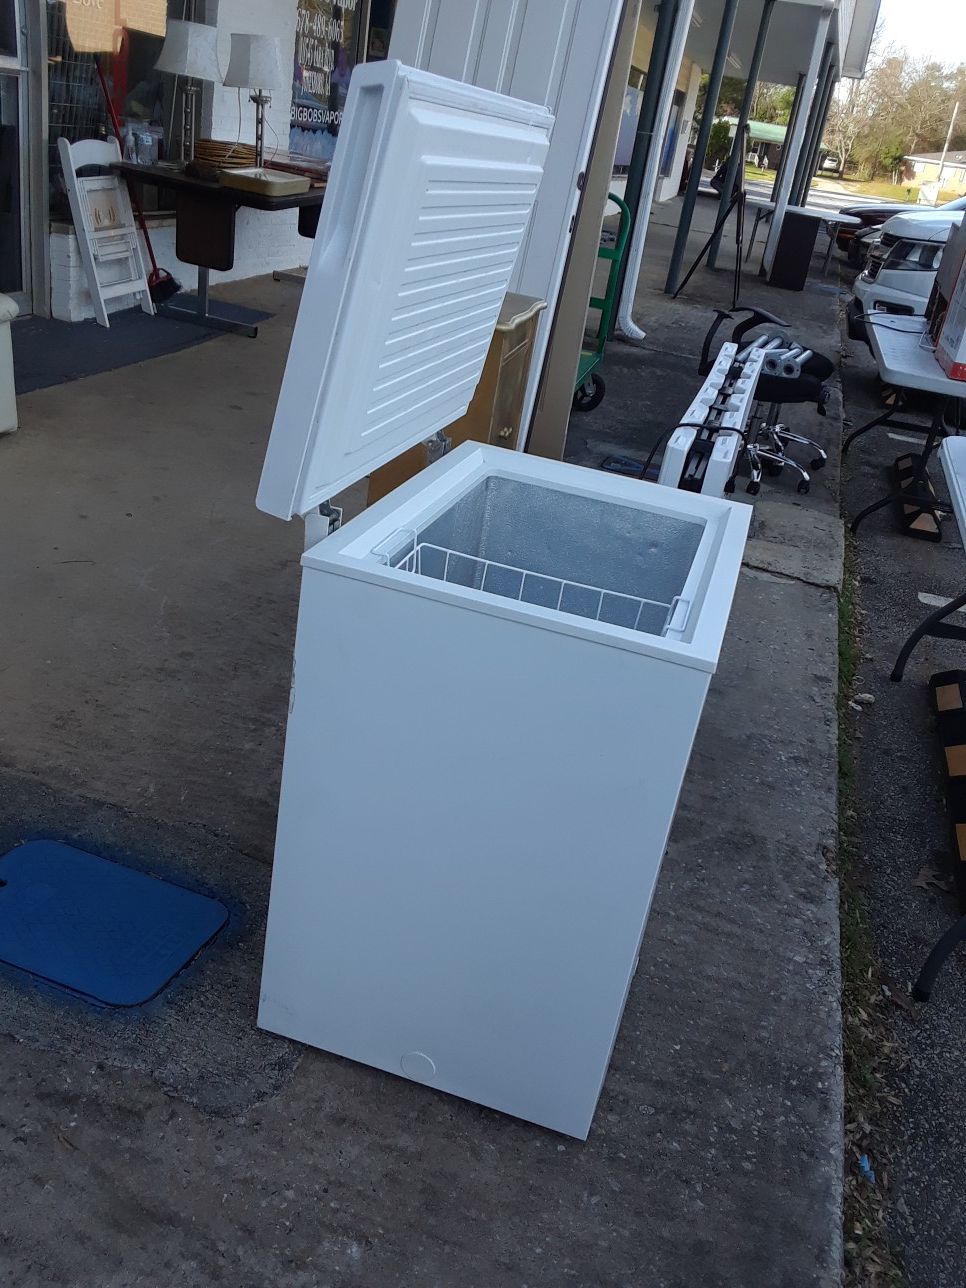 Deep FREEZER for sale for $79.99